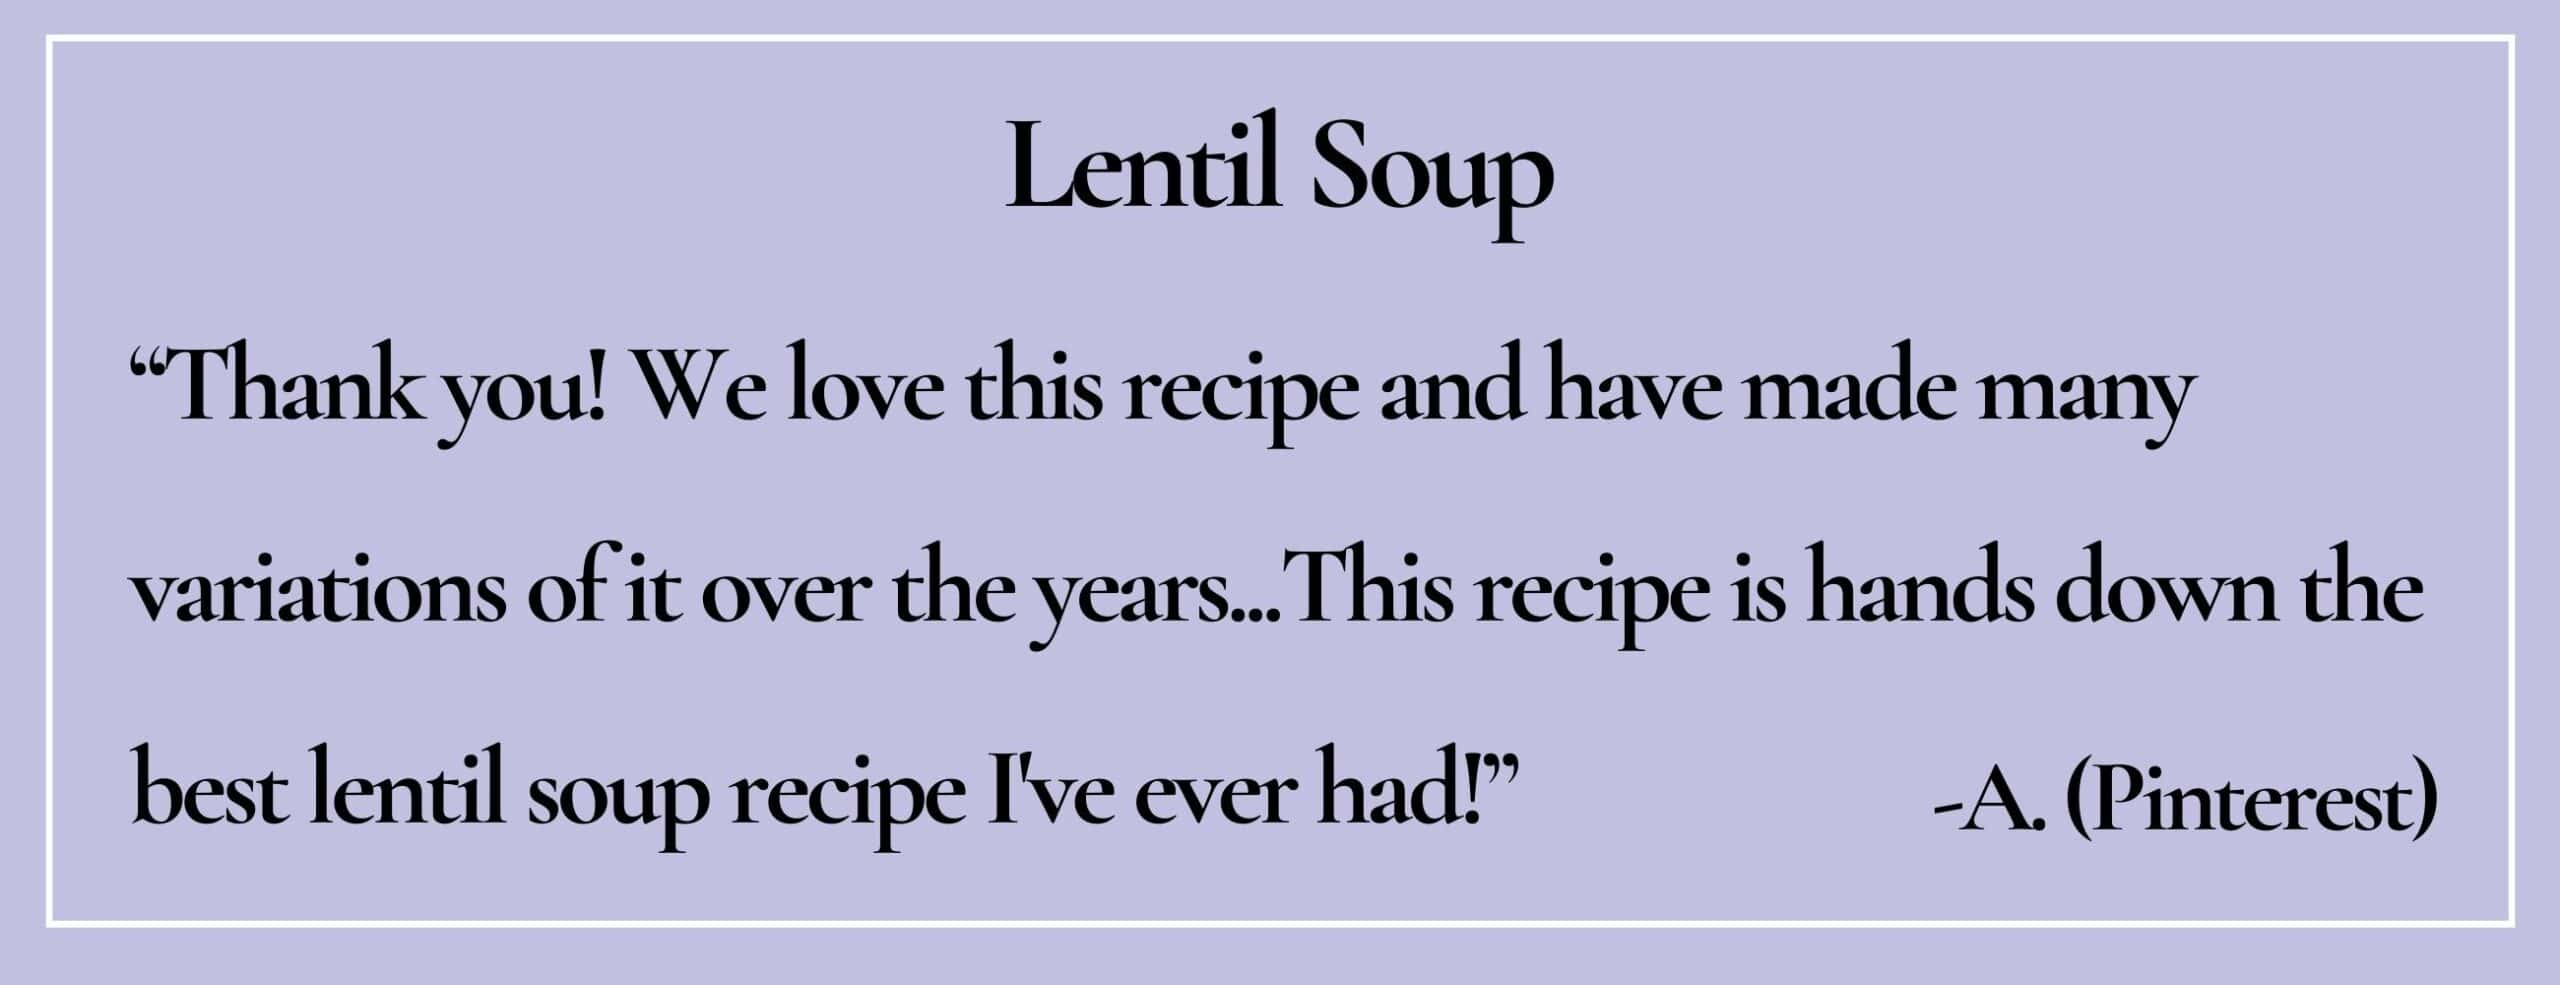 Paraphrased from Pinterest user A. : “We love this recipe...hands down the best lentil soup recipe I've ever had!”